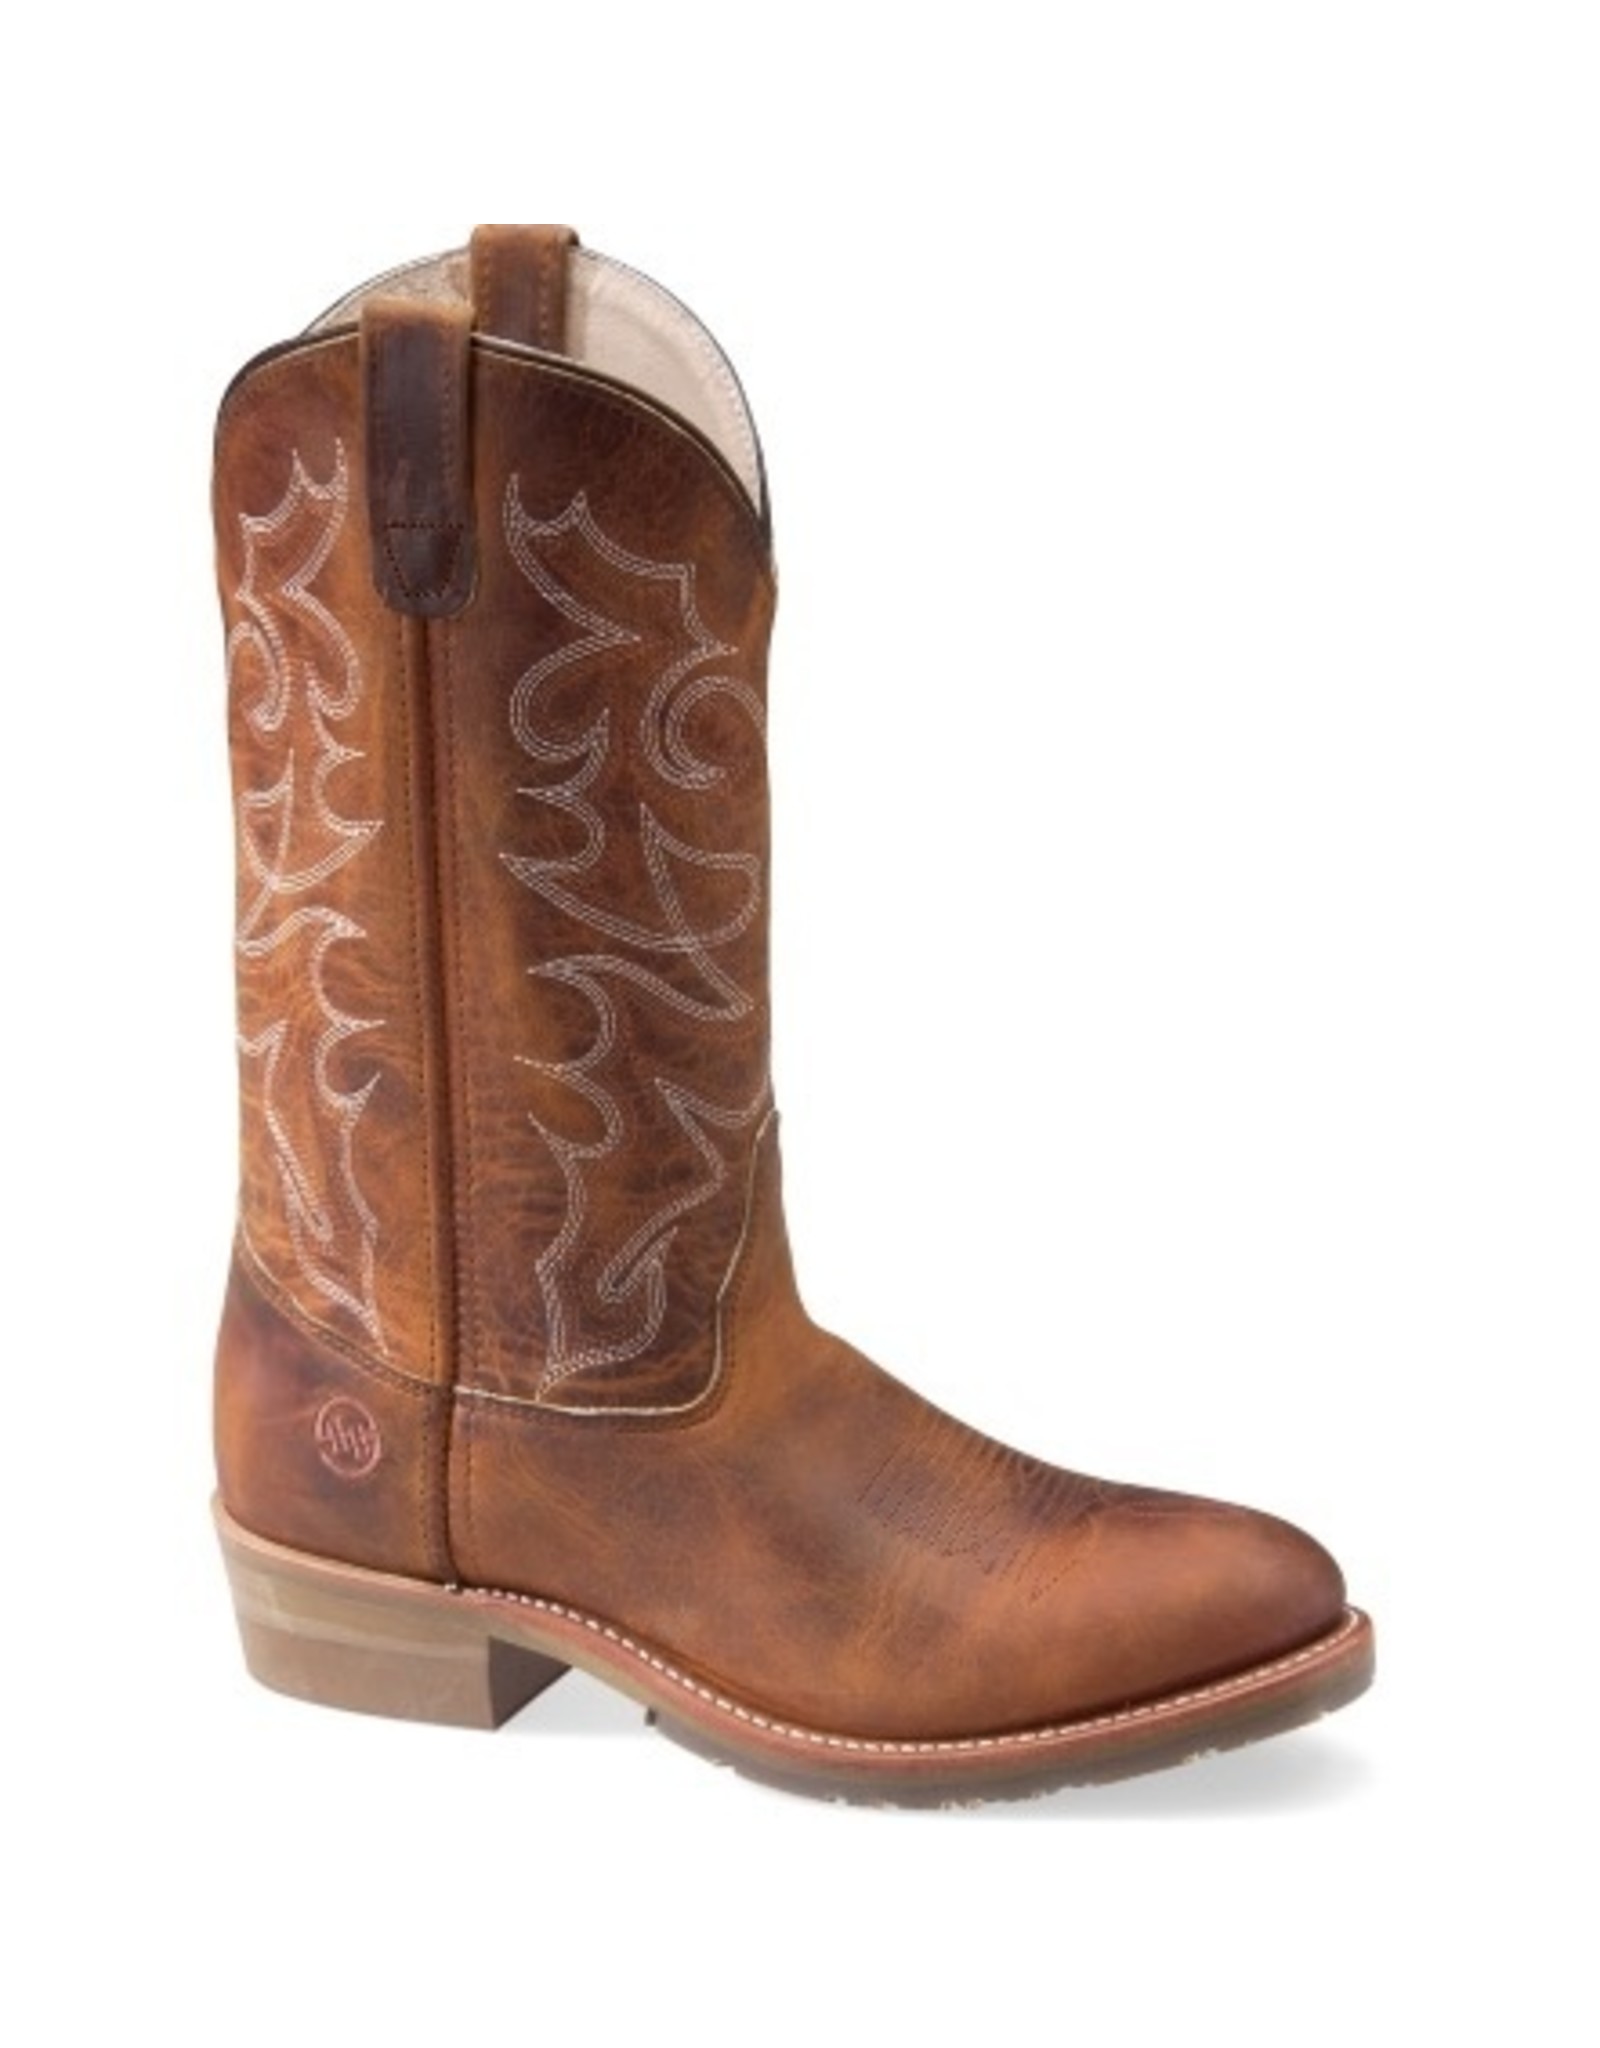 Boots-Men Double H DH1552 Dylan